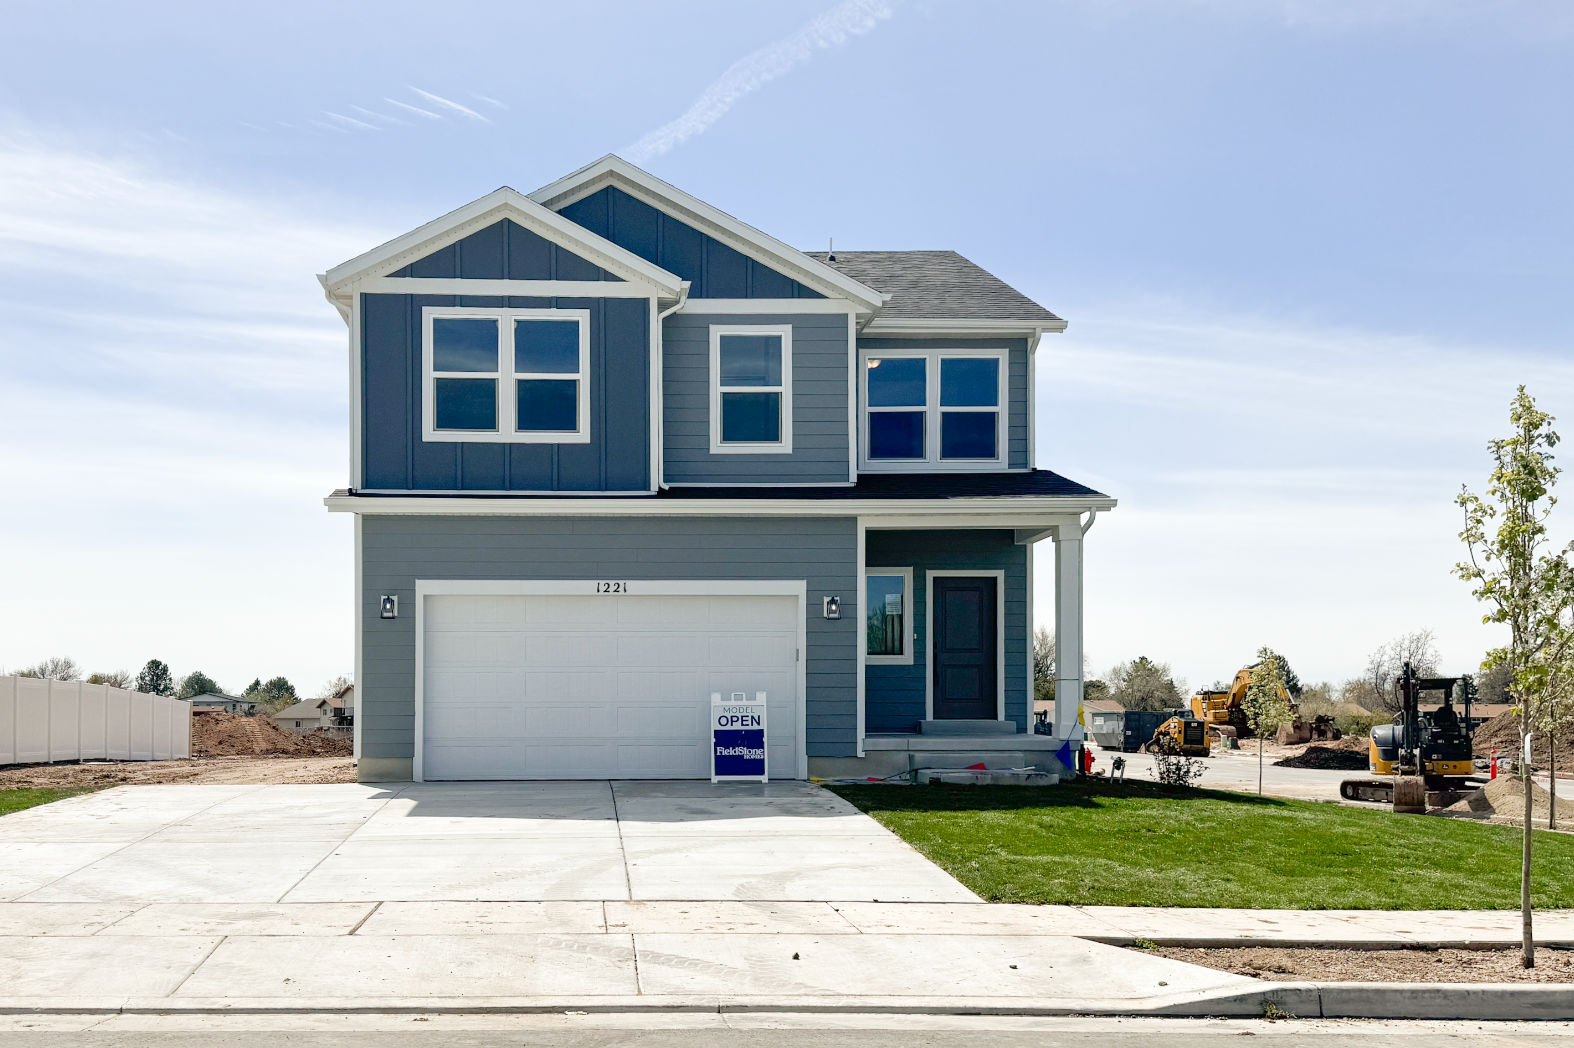 New Home for sale 1221 W 1100 S #135, Clearfield, UT